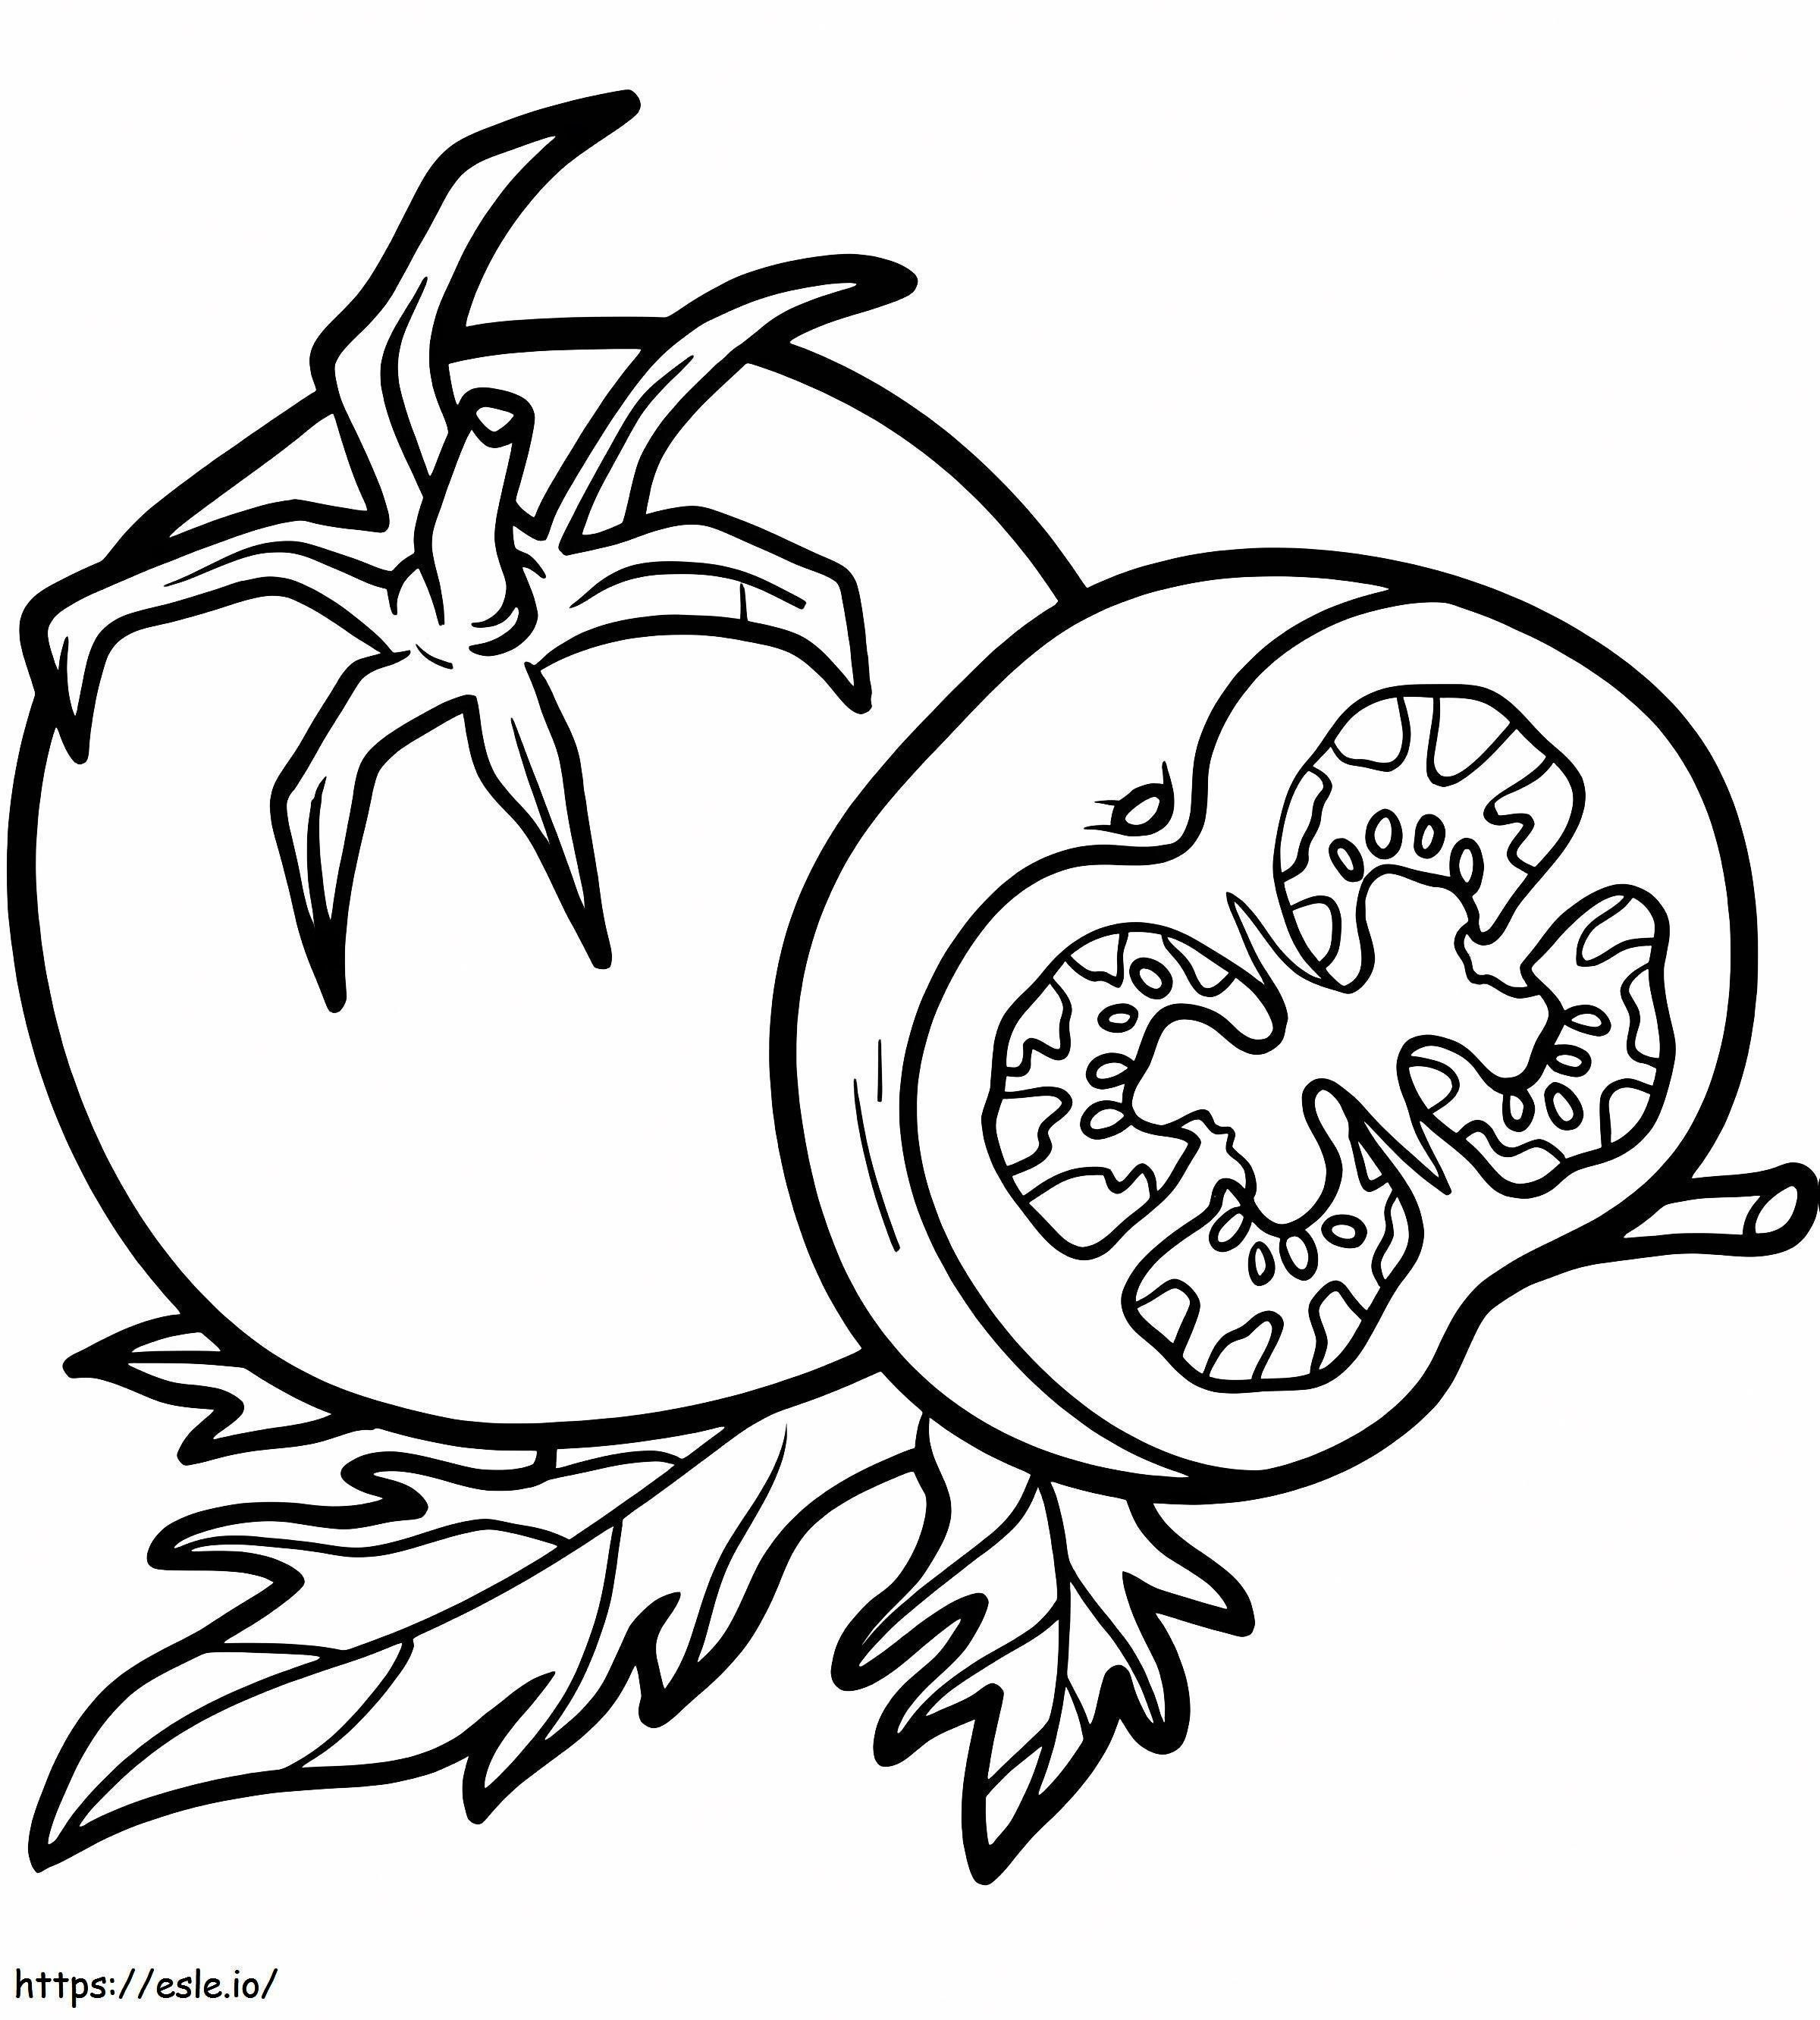 Tomate Vegetal coloring page